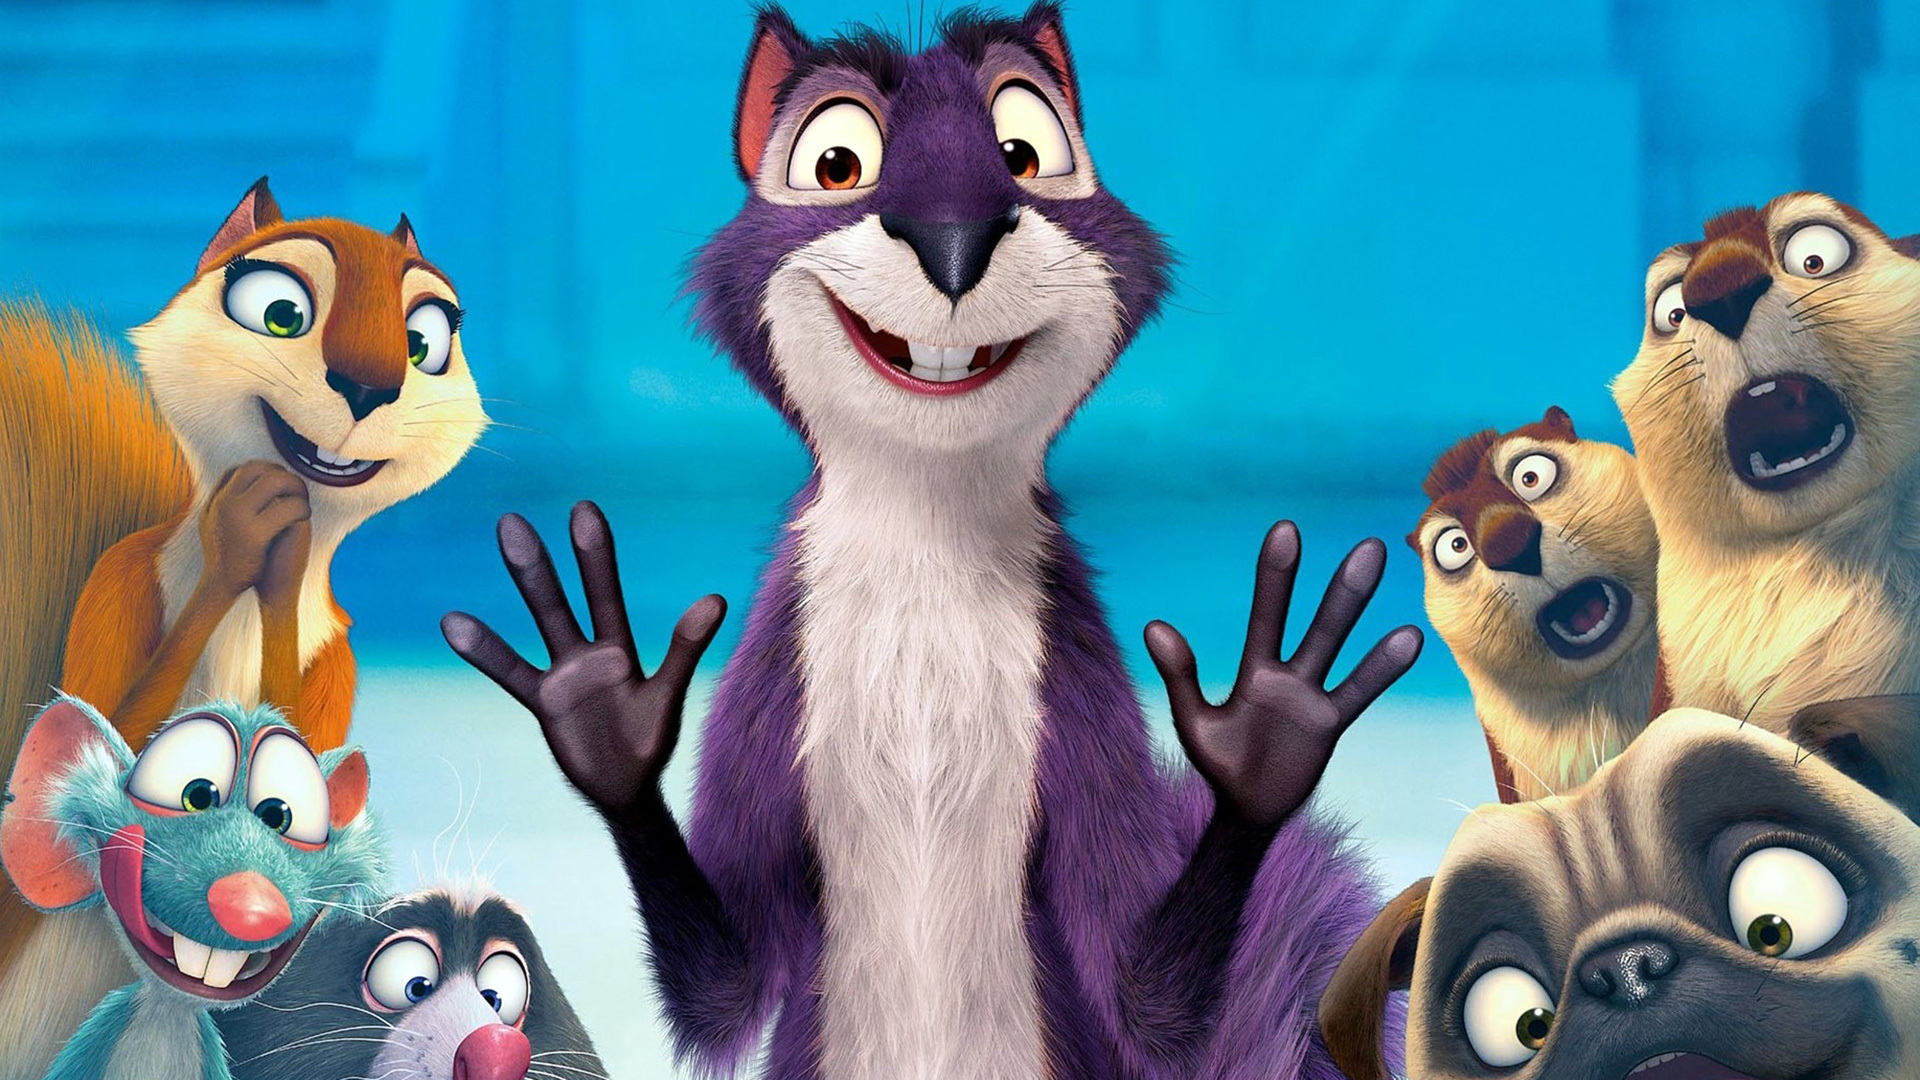 Movie The Nut Job HD Wallpaper Background Image. 